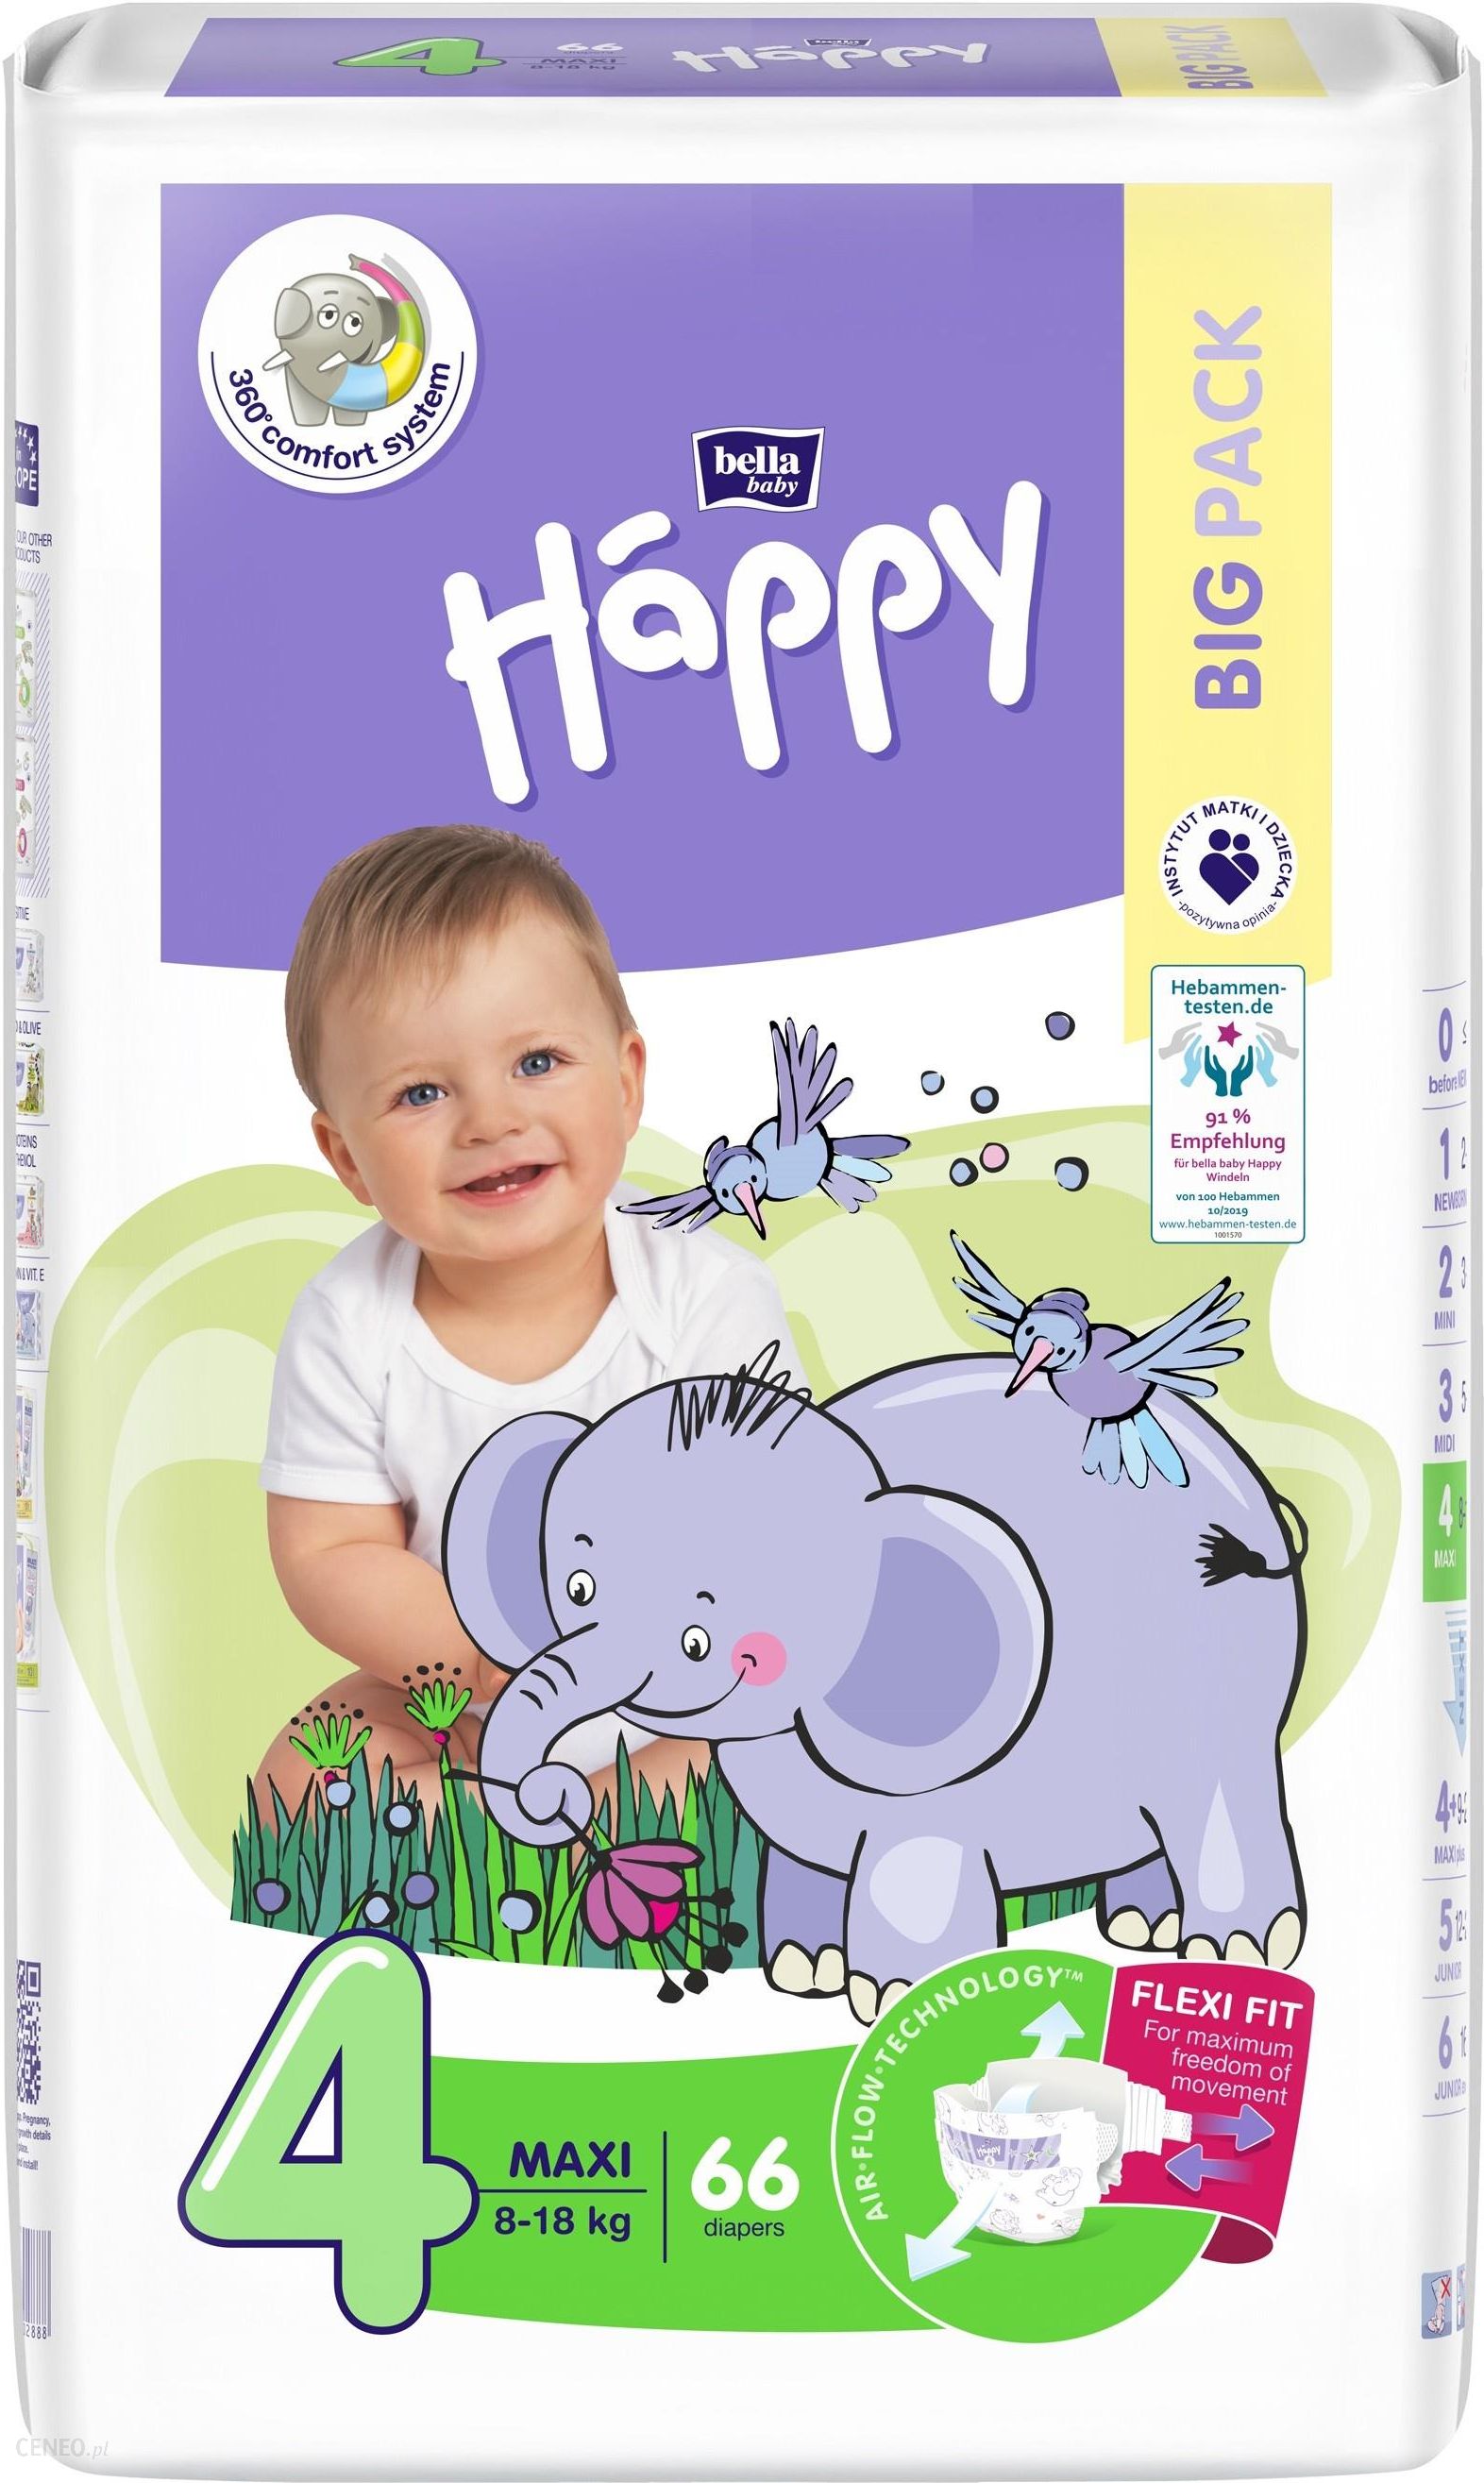 pampers active baby opinie